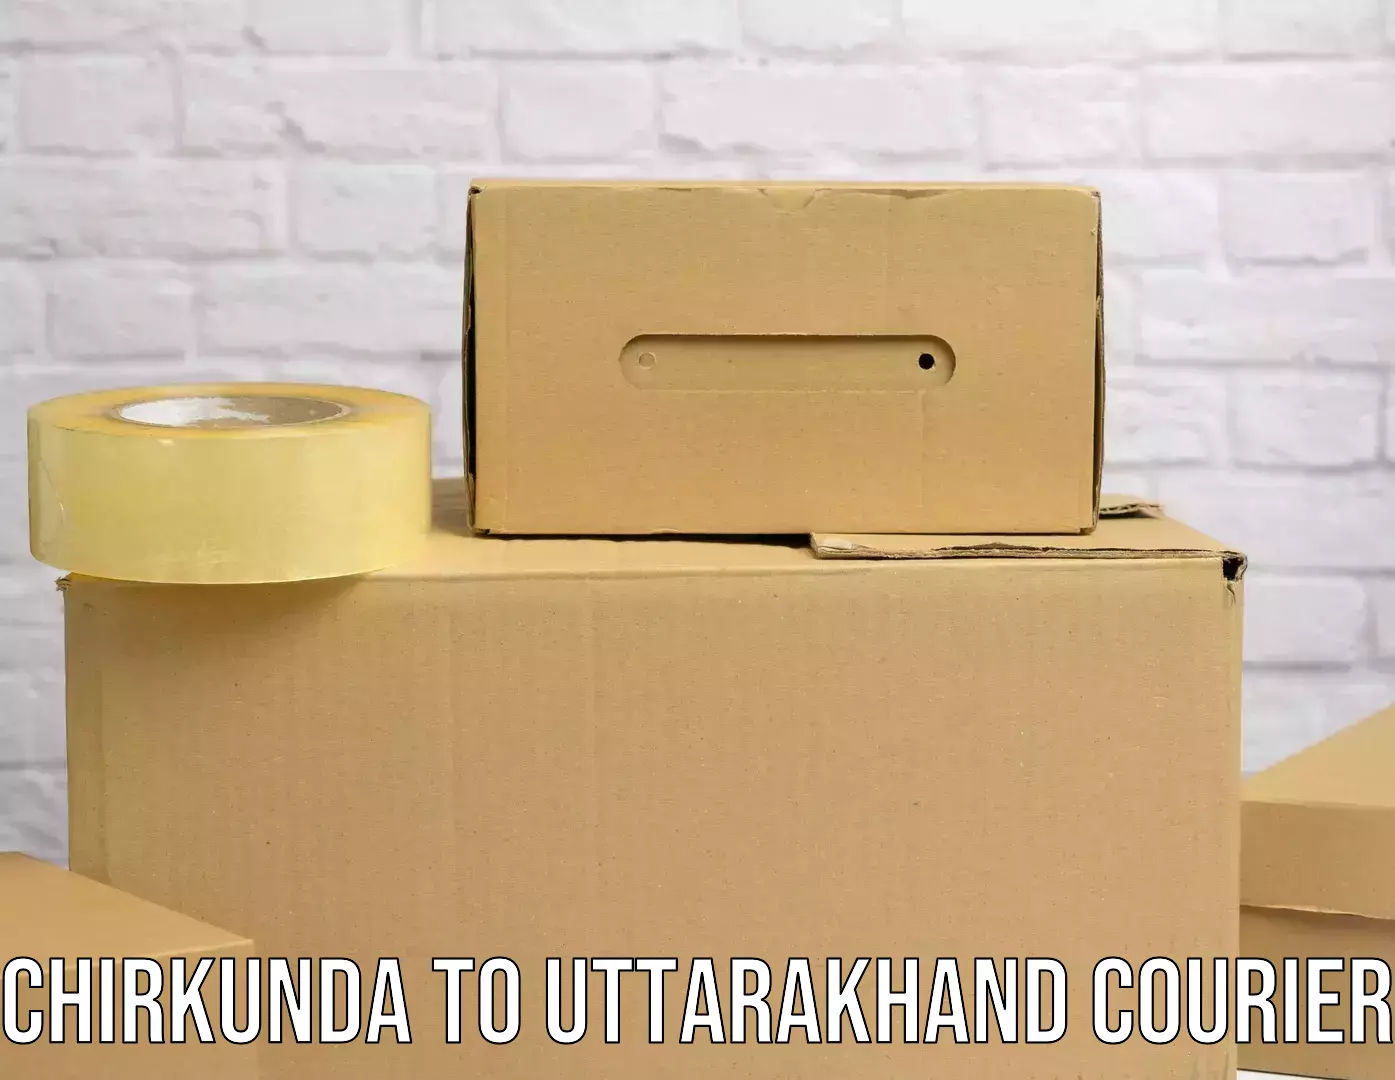 State-of-the-art courier technology Chirkunda to Nainital